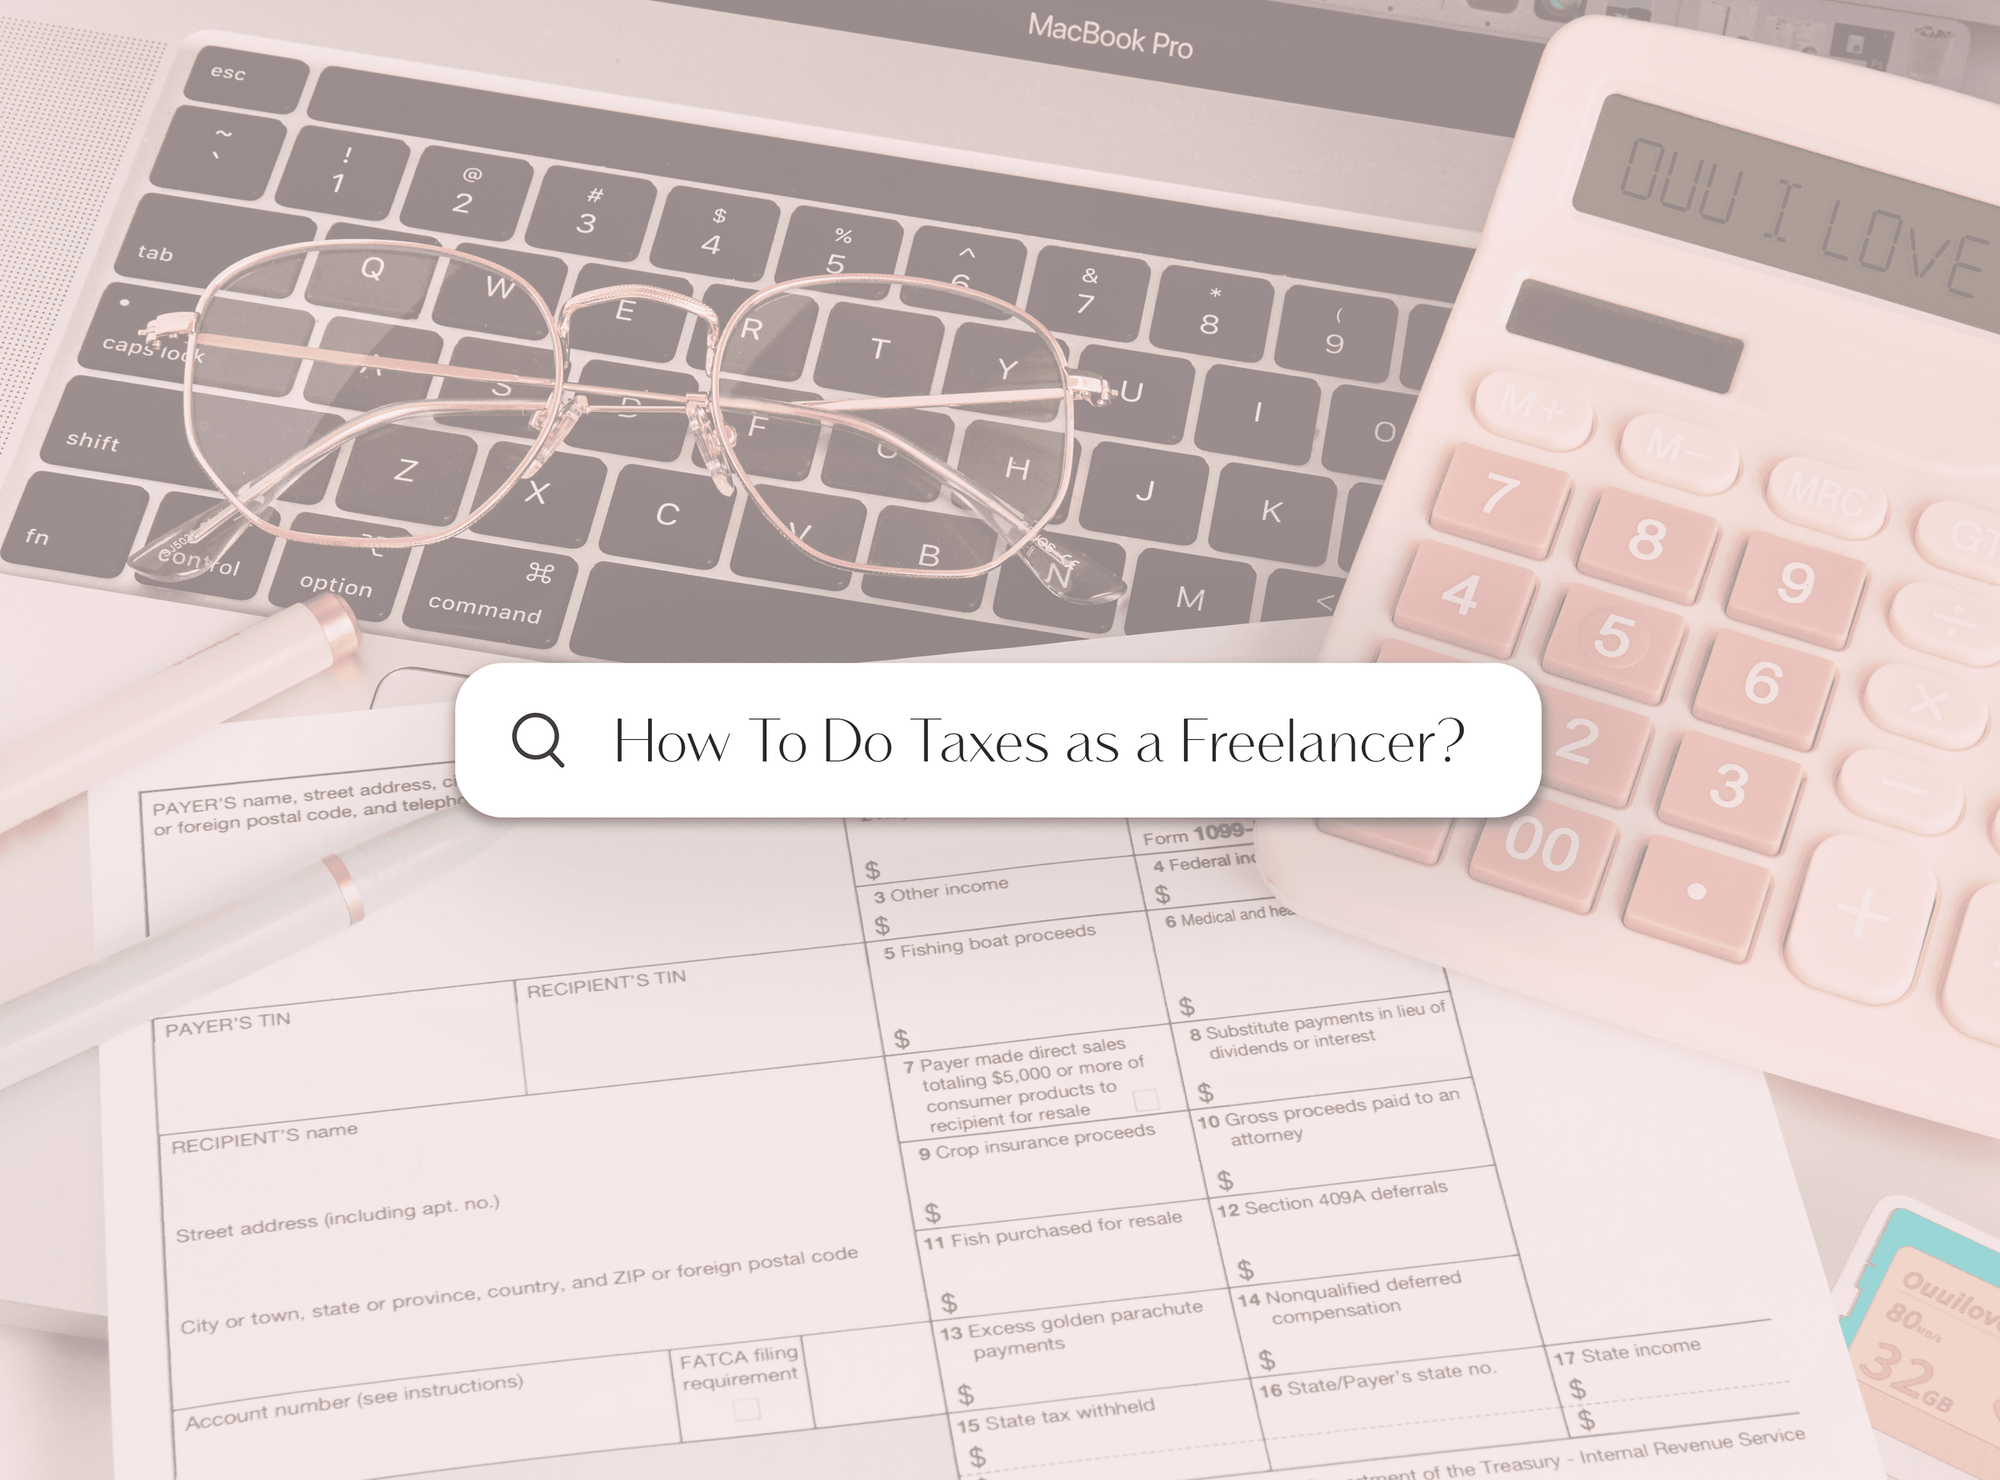 Doing Taxes as a Freelancer: How Does it Work?